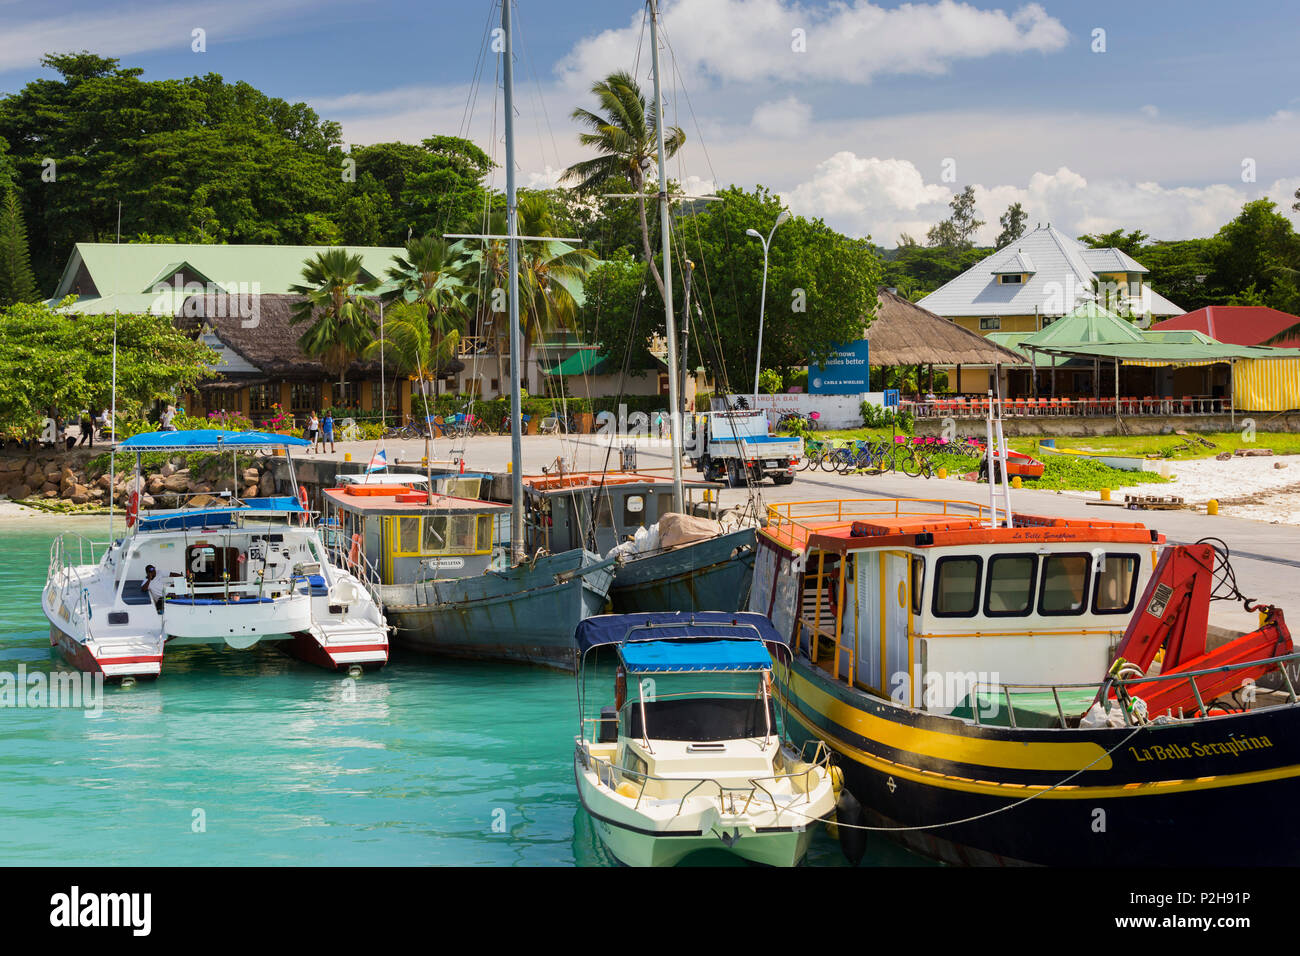 Boats in the harbour on La Digue Island, Seychelles Stock Photo